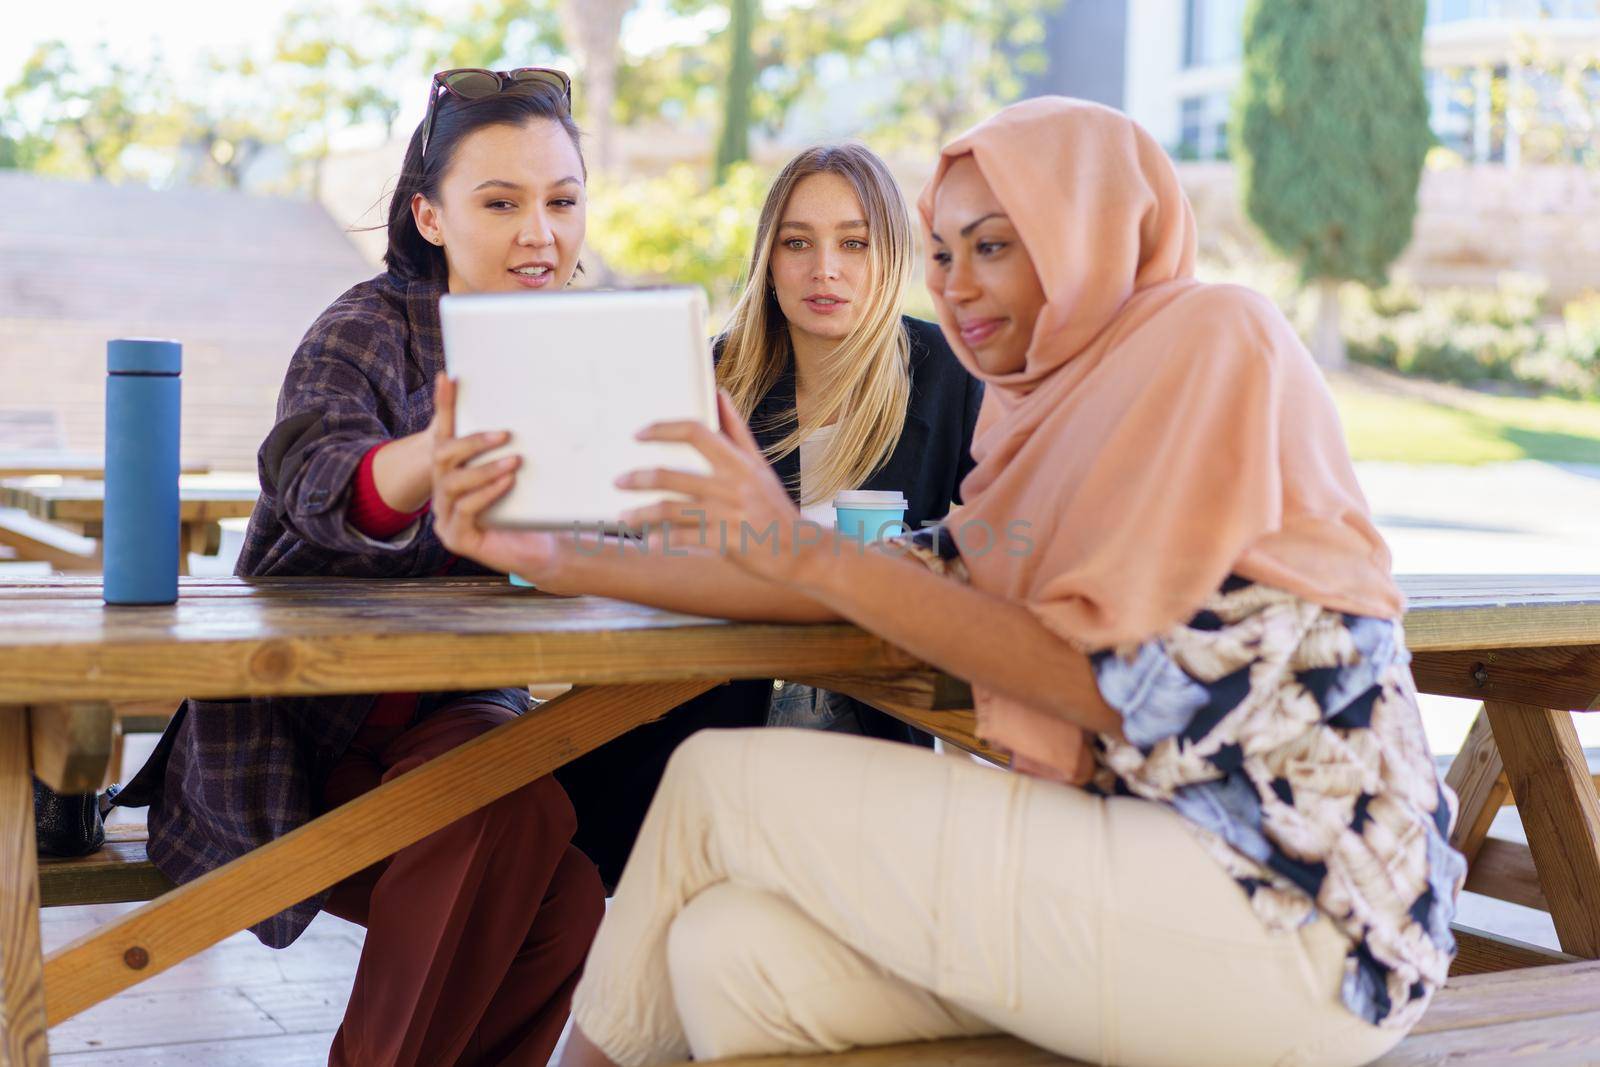 Group of positive young multiethnic women smiling and drinking coffee, to go while watching funny video on tablet, during break in outdoor cafe in park